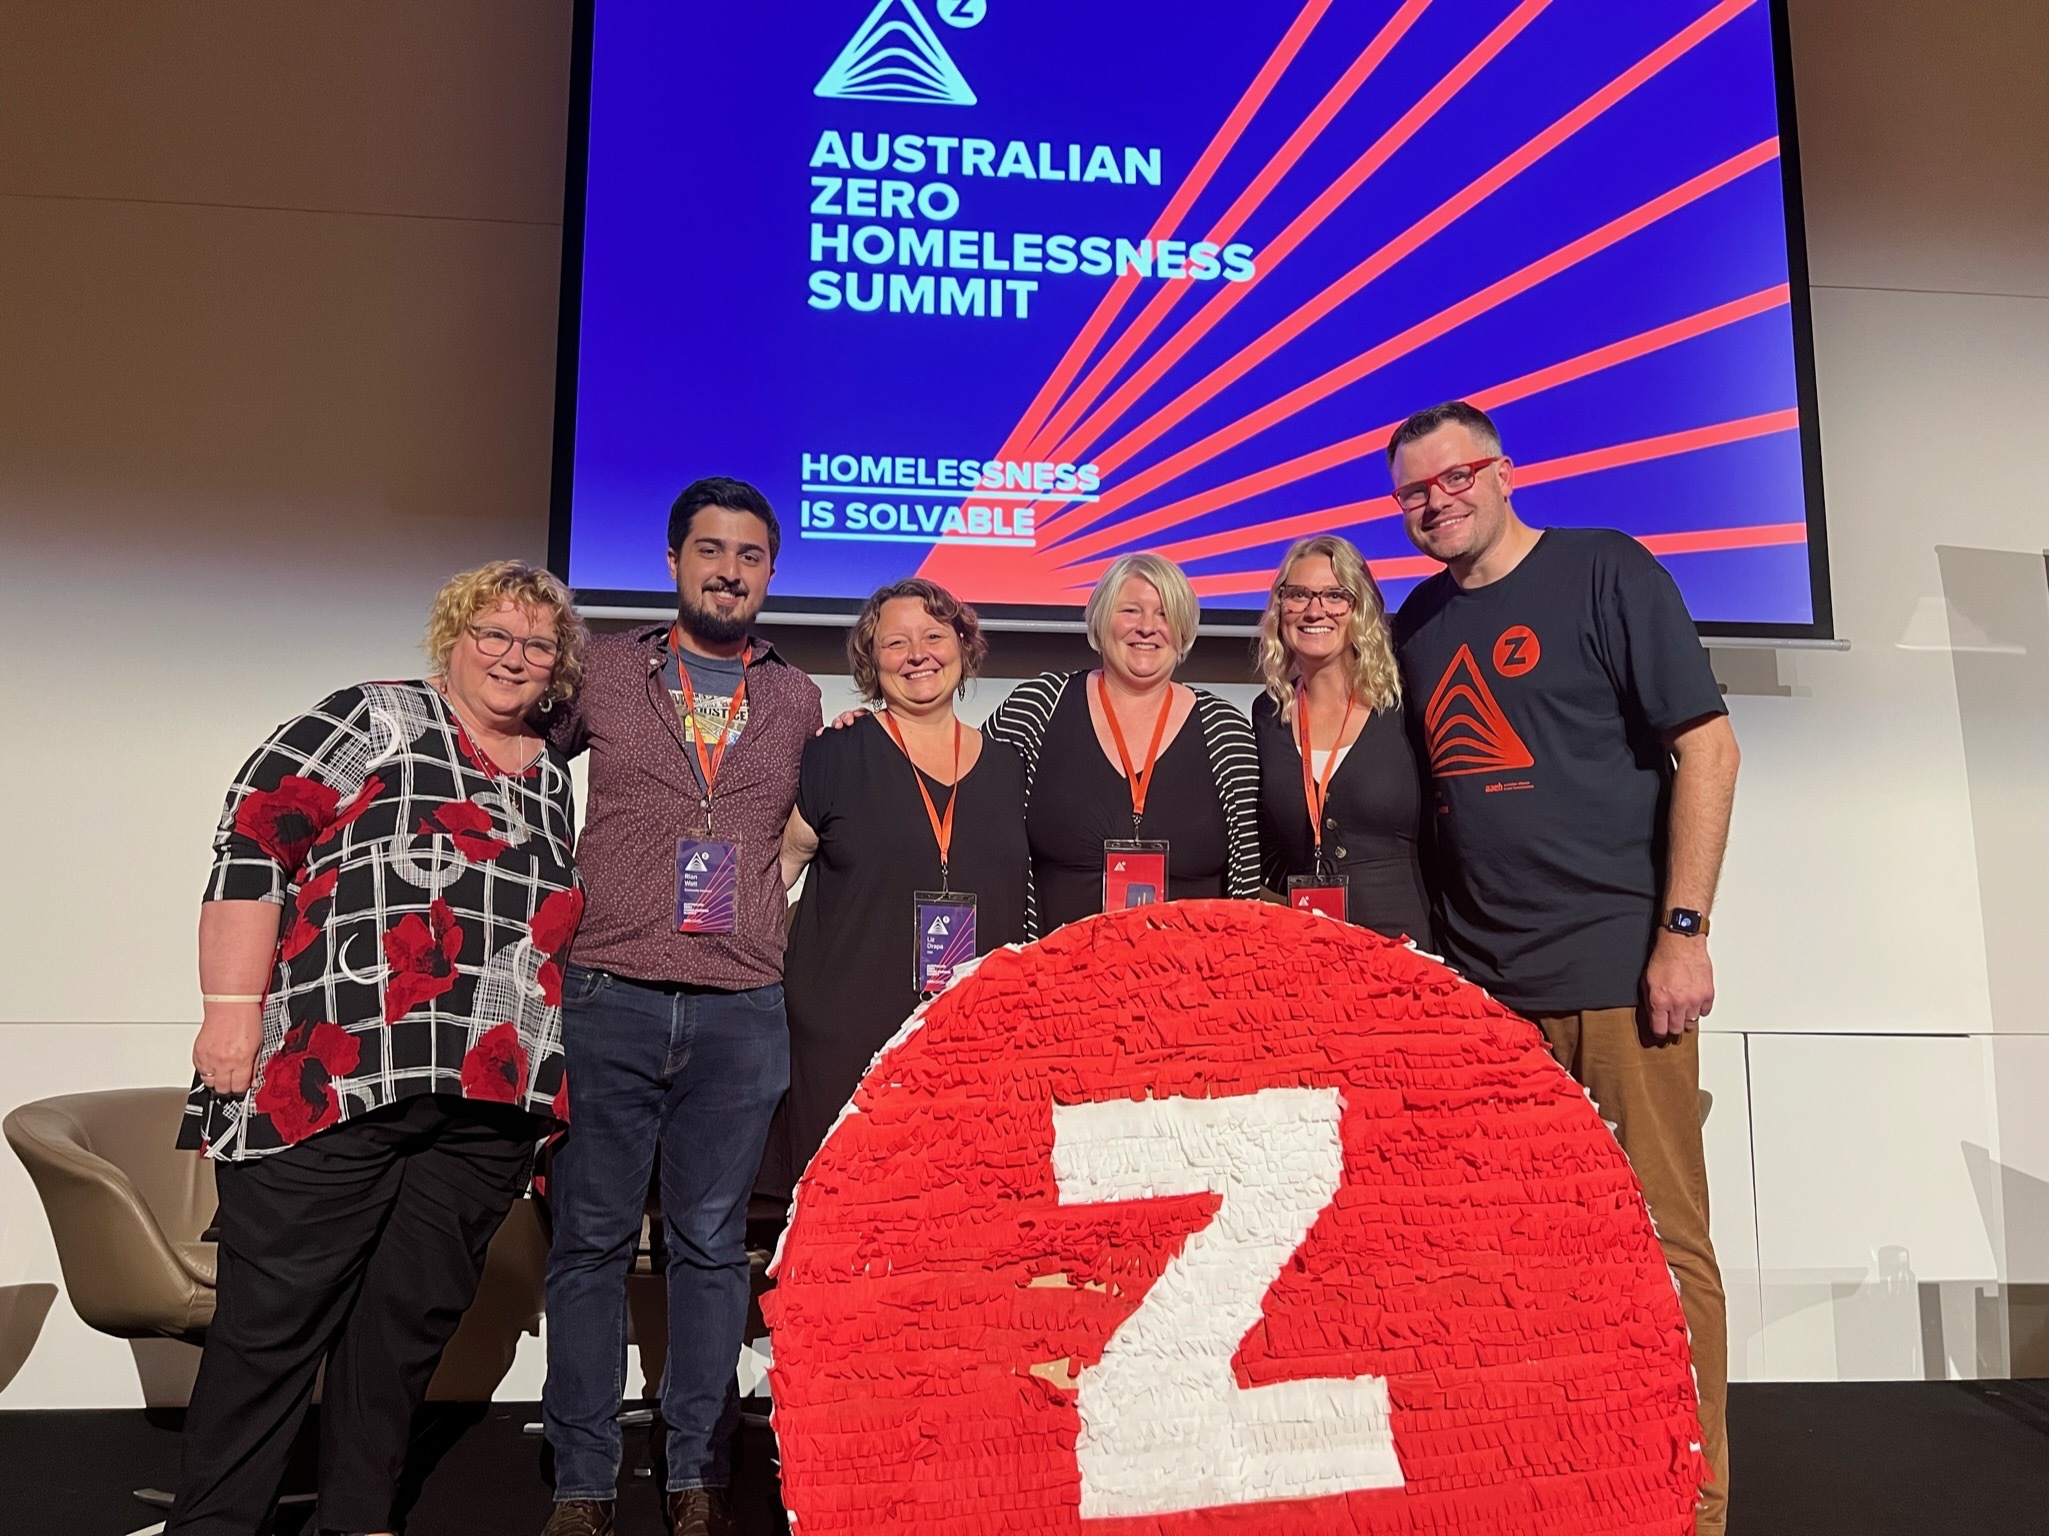 Group photo of six people standing on a stage in front of a large Z